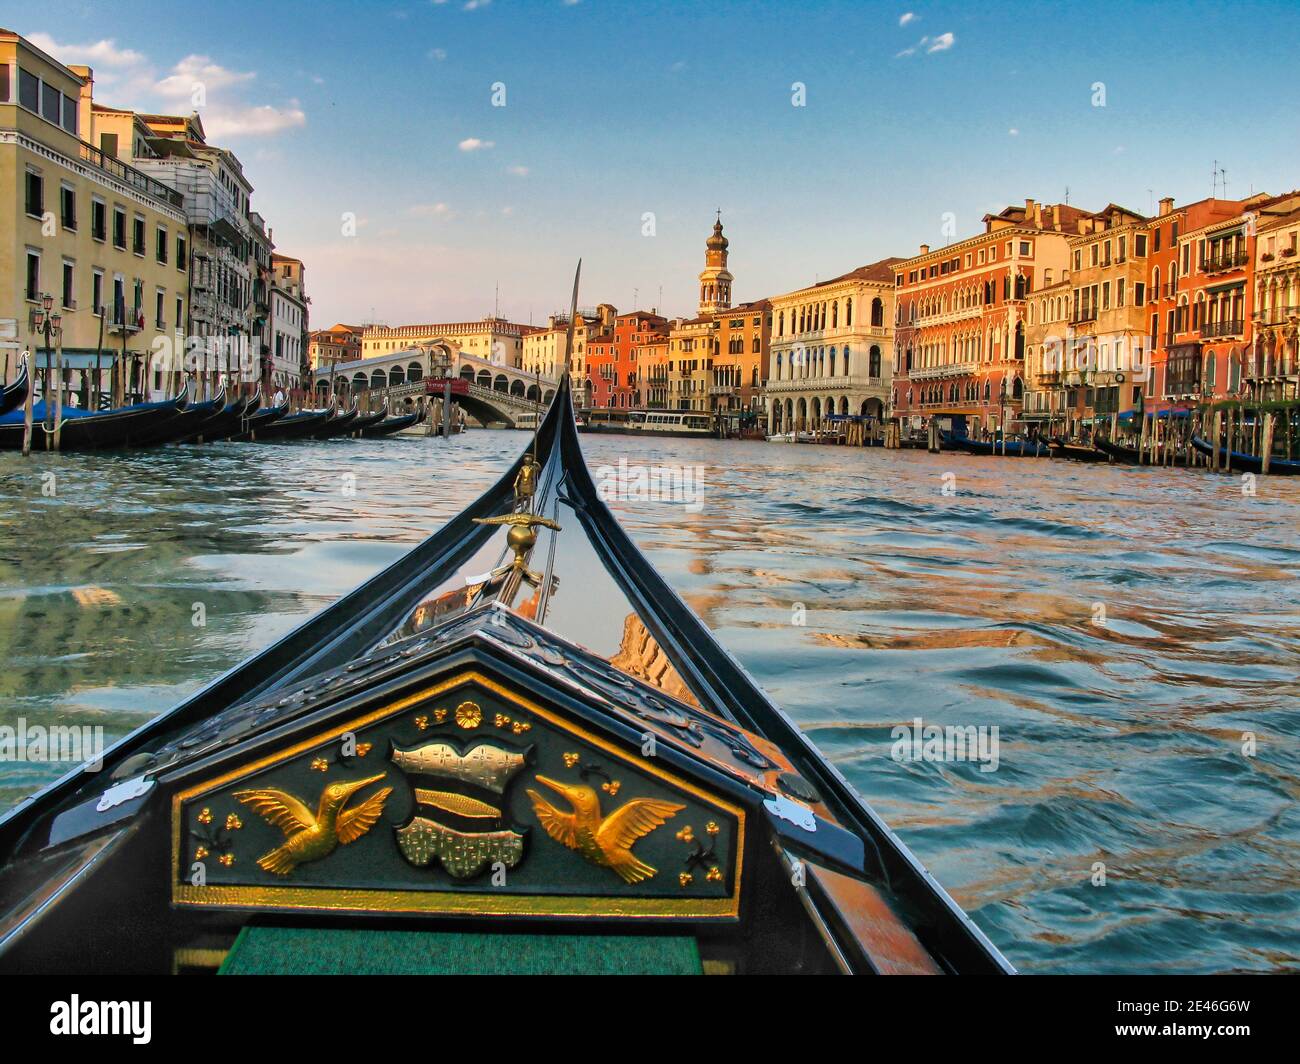 A gondola bow, with the famous Rialto bridge in background, cruises on Venice's Grand Canal Stock Photo